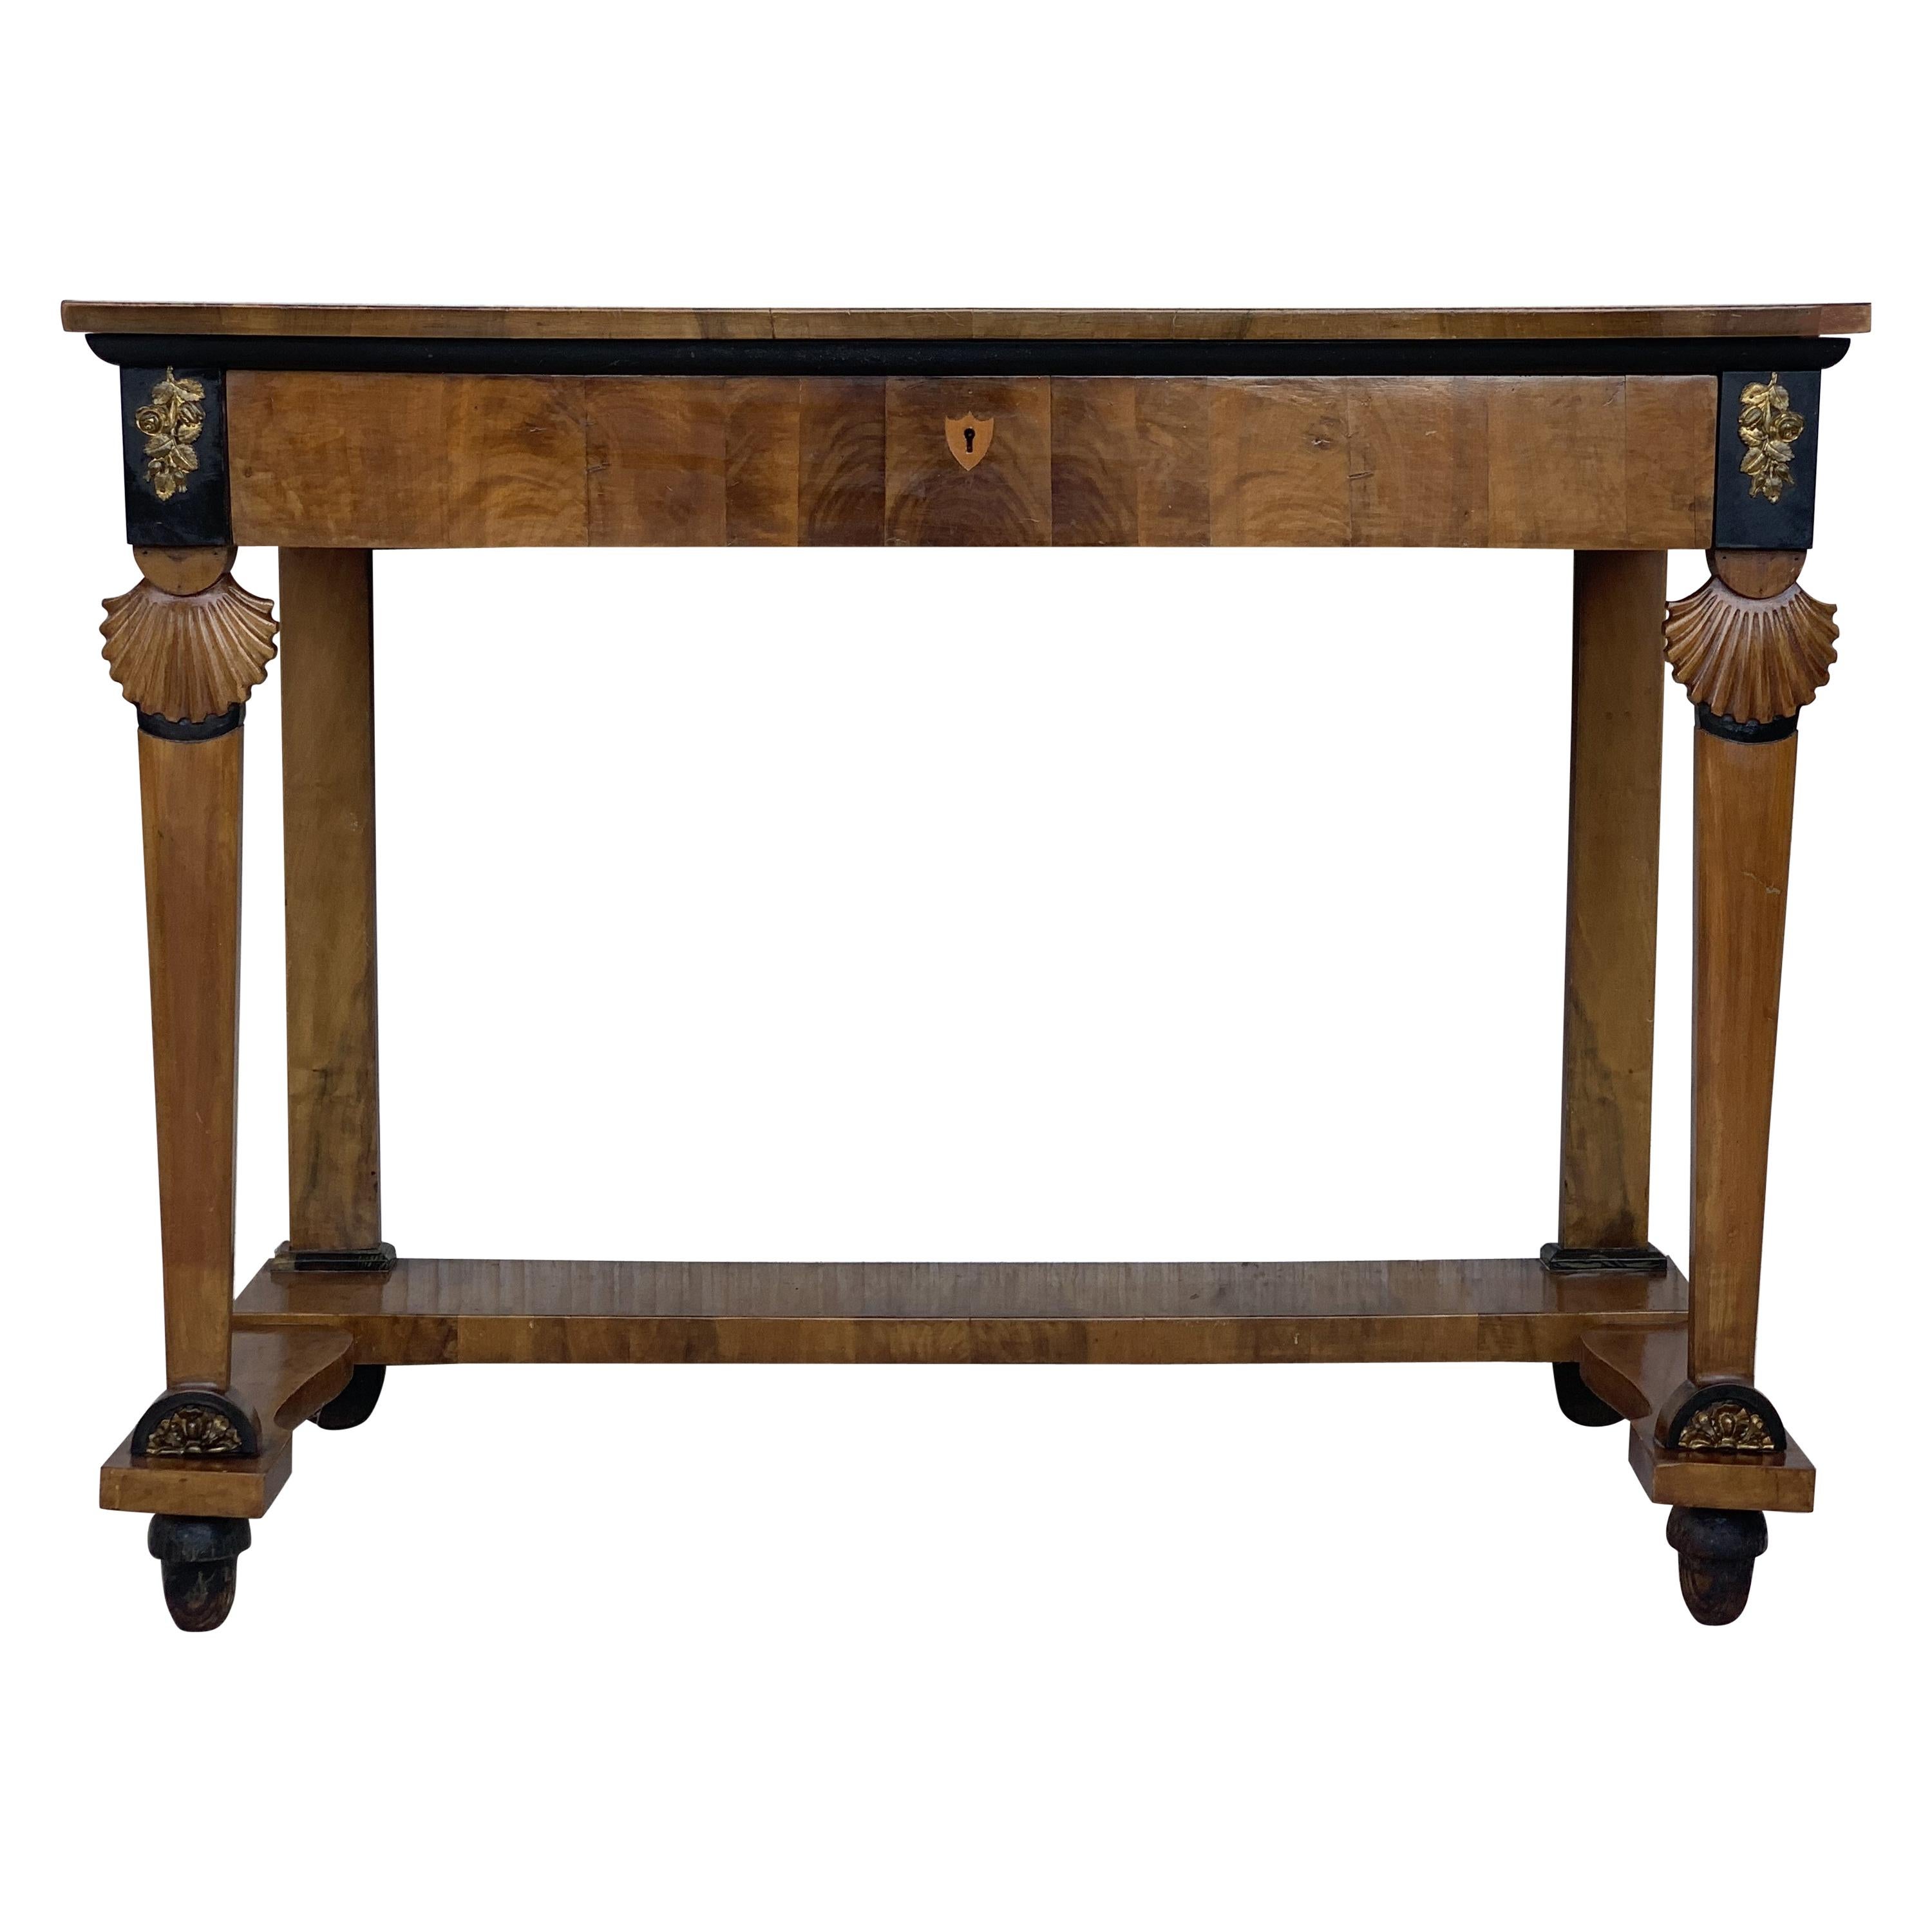 Antique French Empire Fruitwood Console Table with drawer, Early 19th Century